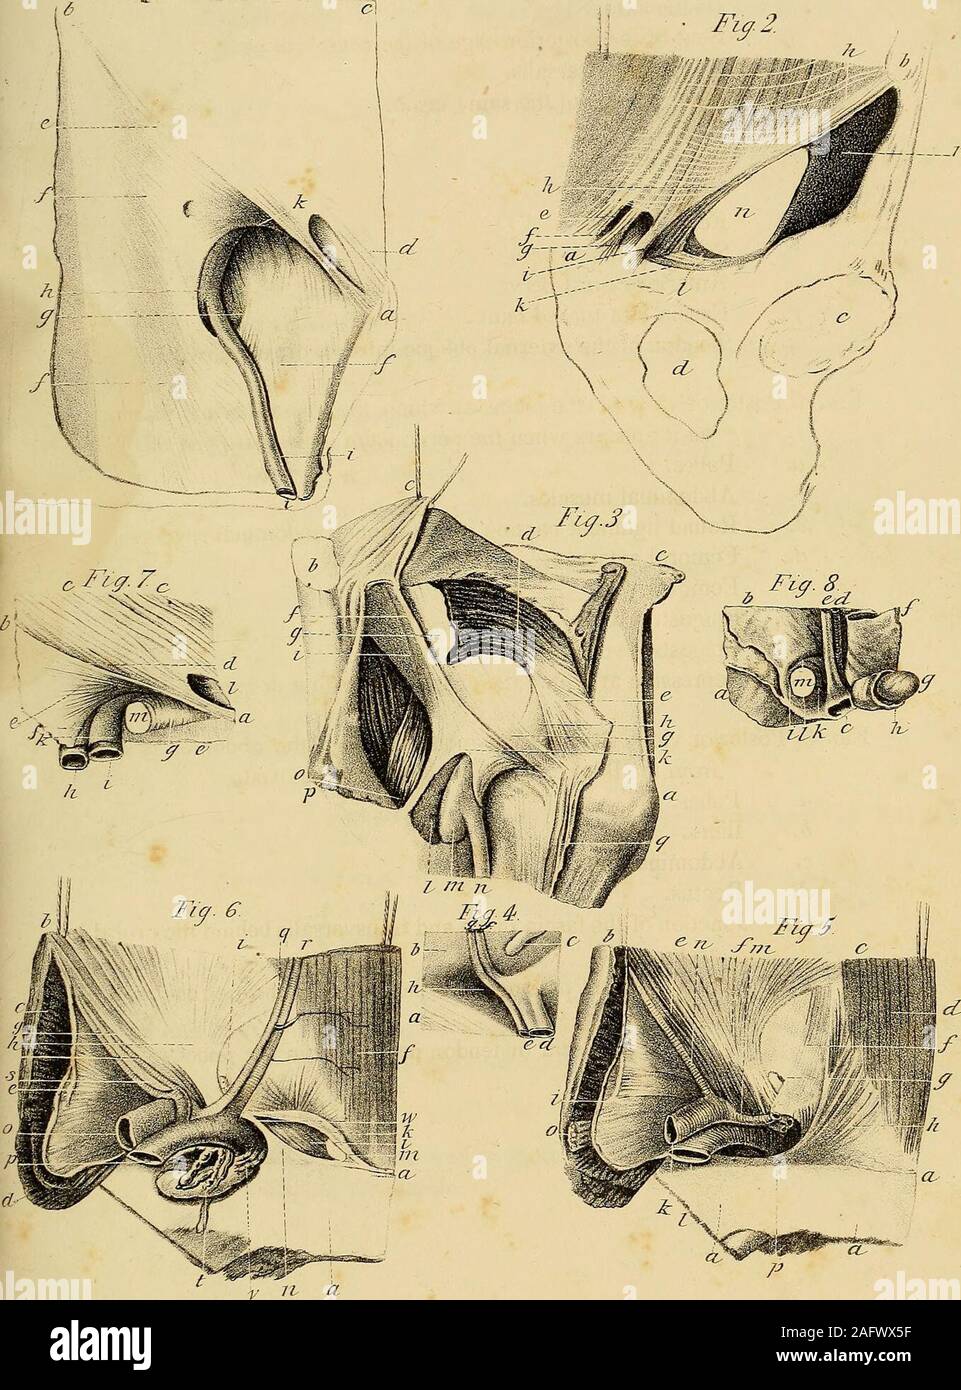 . The anatomy and surgical treatment of abdominal hernia. liaca. k. Femoral sheath. 7. Femoral artery. m. Femoral vein. n. Saphsena major vein. o. Anterior crural nerve. p. Fascia lata turned back. q. Tendon of the external oblique muscle, drawn down. Fig. 4. Posterior view of the place at which the crural hernia descends,as it appears when the peritoneum is first stripped off. a. Pubes. b. Abdominal muscles. c. Round ligament passing into the inner abdominal ring. d. Femoral artery. e. Femoral vein. /. Epigastric artery. g. Epigastric vein. h. Depression at which the crural hernia first desce Stock Photo